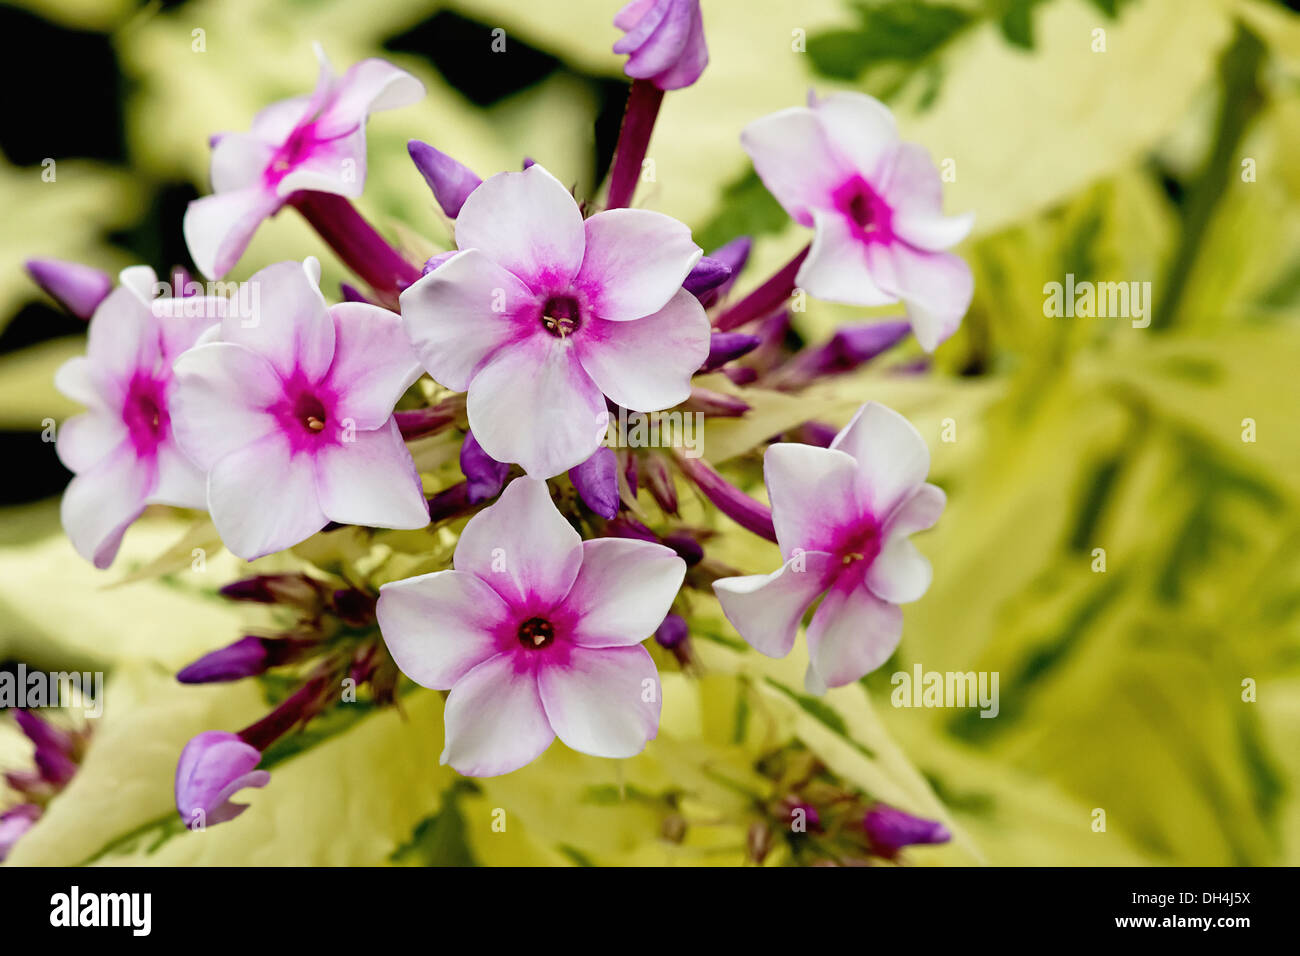 Phlox. Cluster of pale pink flowers with darker pink at centre and buds and cream and green variegated foliage. Stock Photo